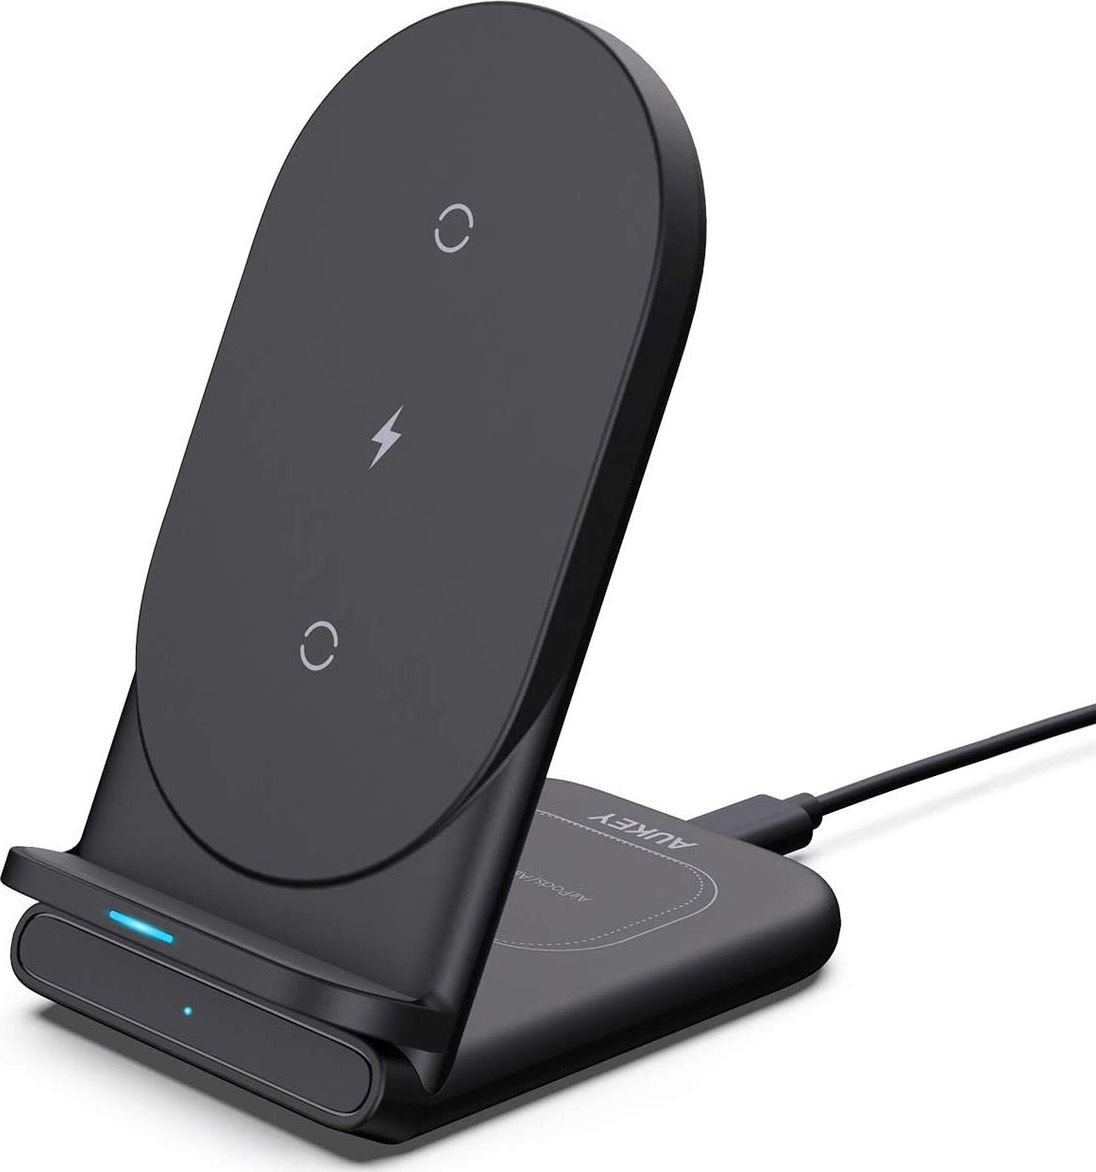 Incarcator auto AUKEY, Aircore Series, 2-In-1 Wireless Charging Stand